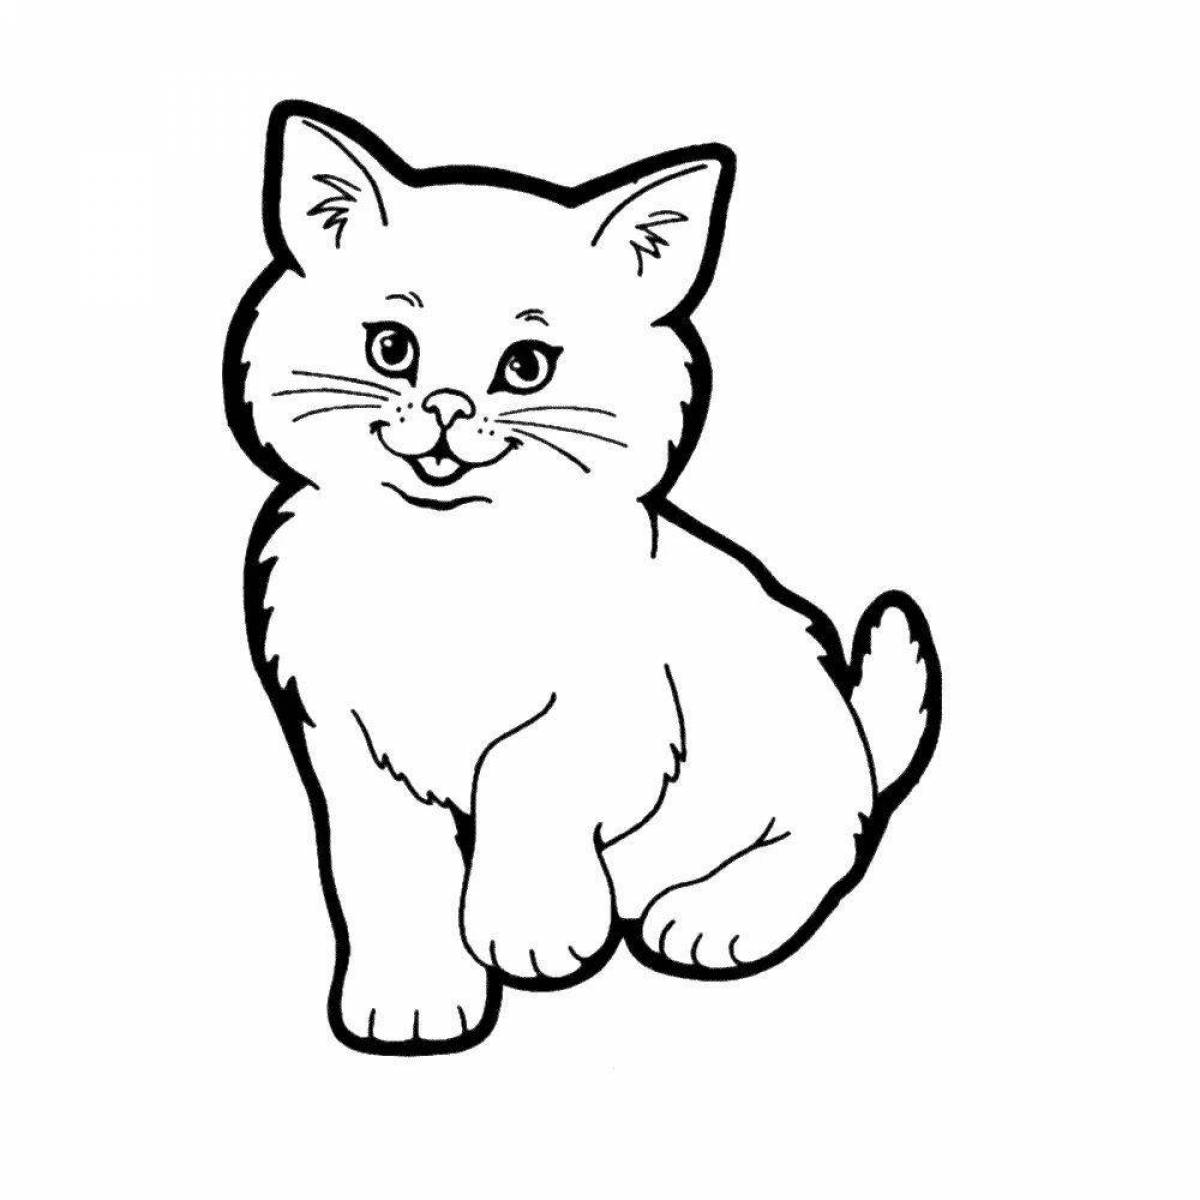 Adorable ginger cat coloring page